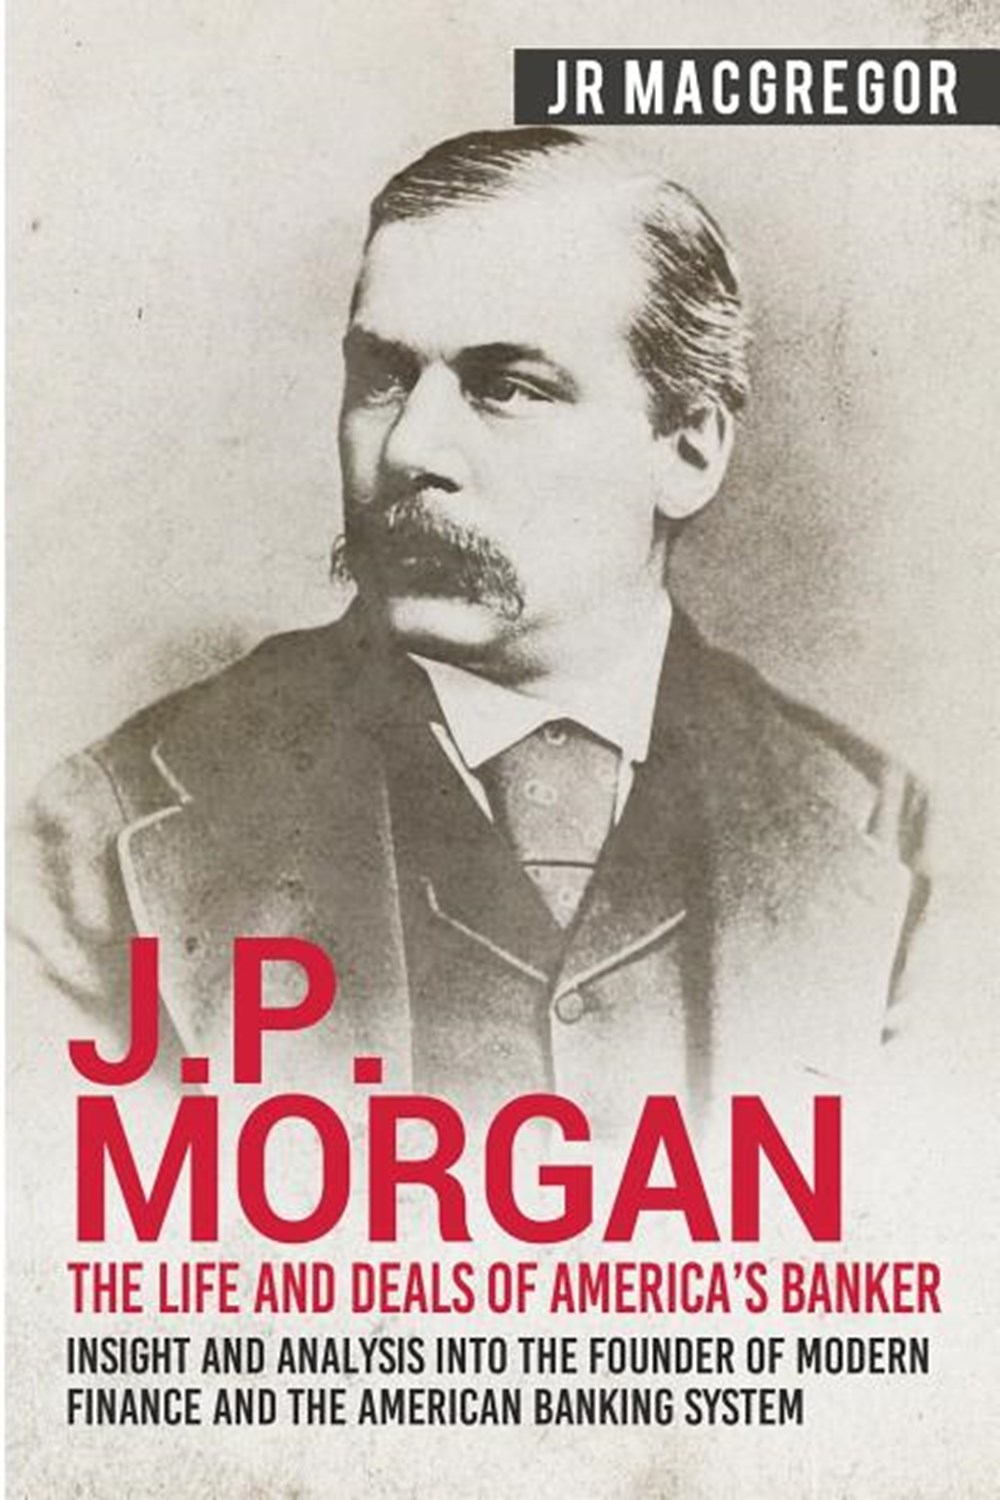 J.P. Morgan - The Life and Deals of America's Banker Insight and Analysis into the Founder of Modern